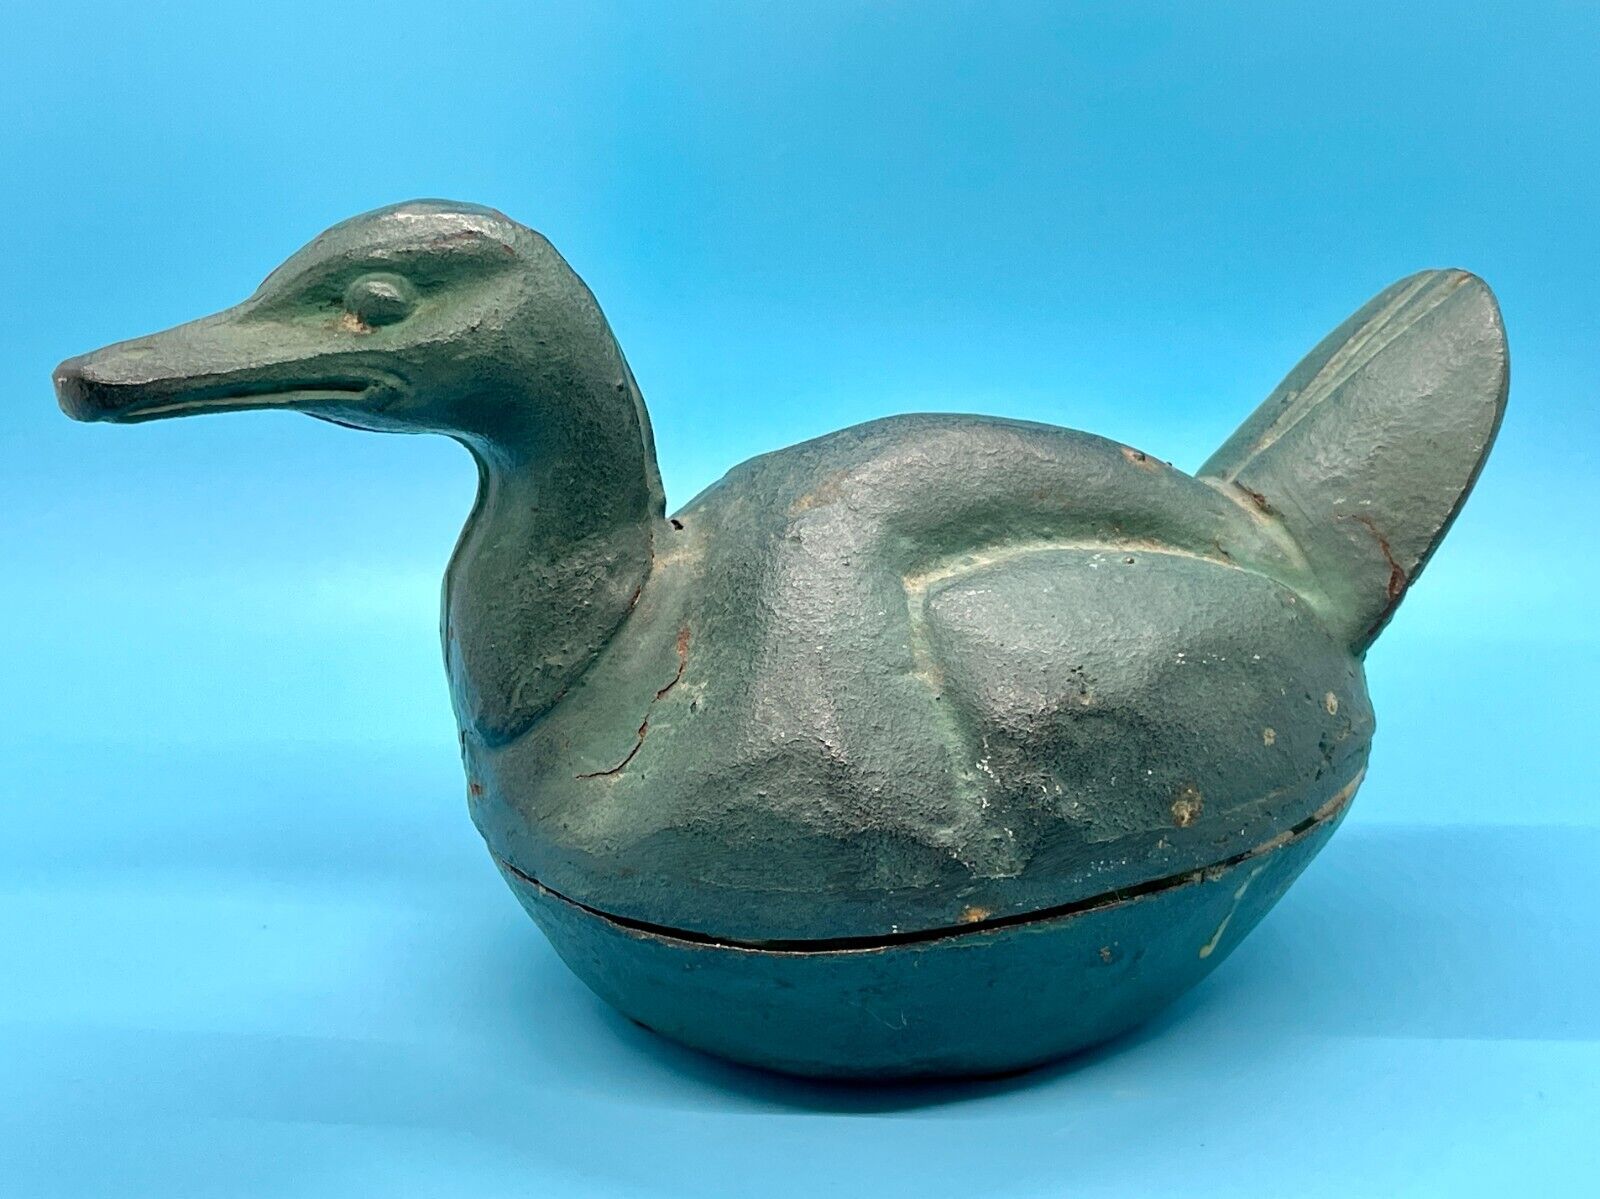 Antique Cast Iron Green Duck Trinket Box w/ Lid Made In Japan – Very Nice